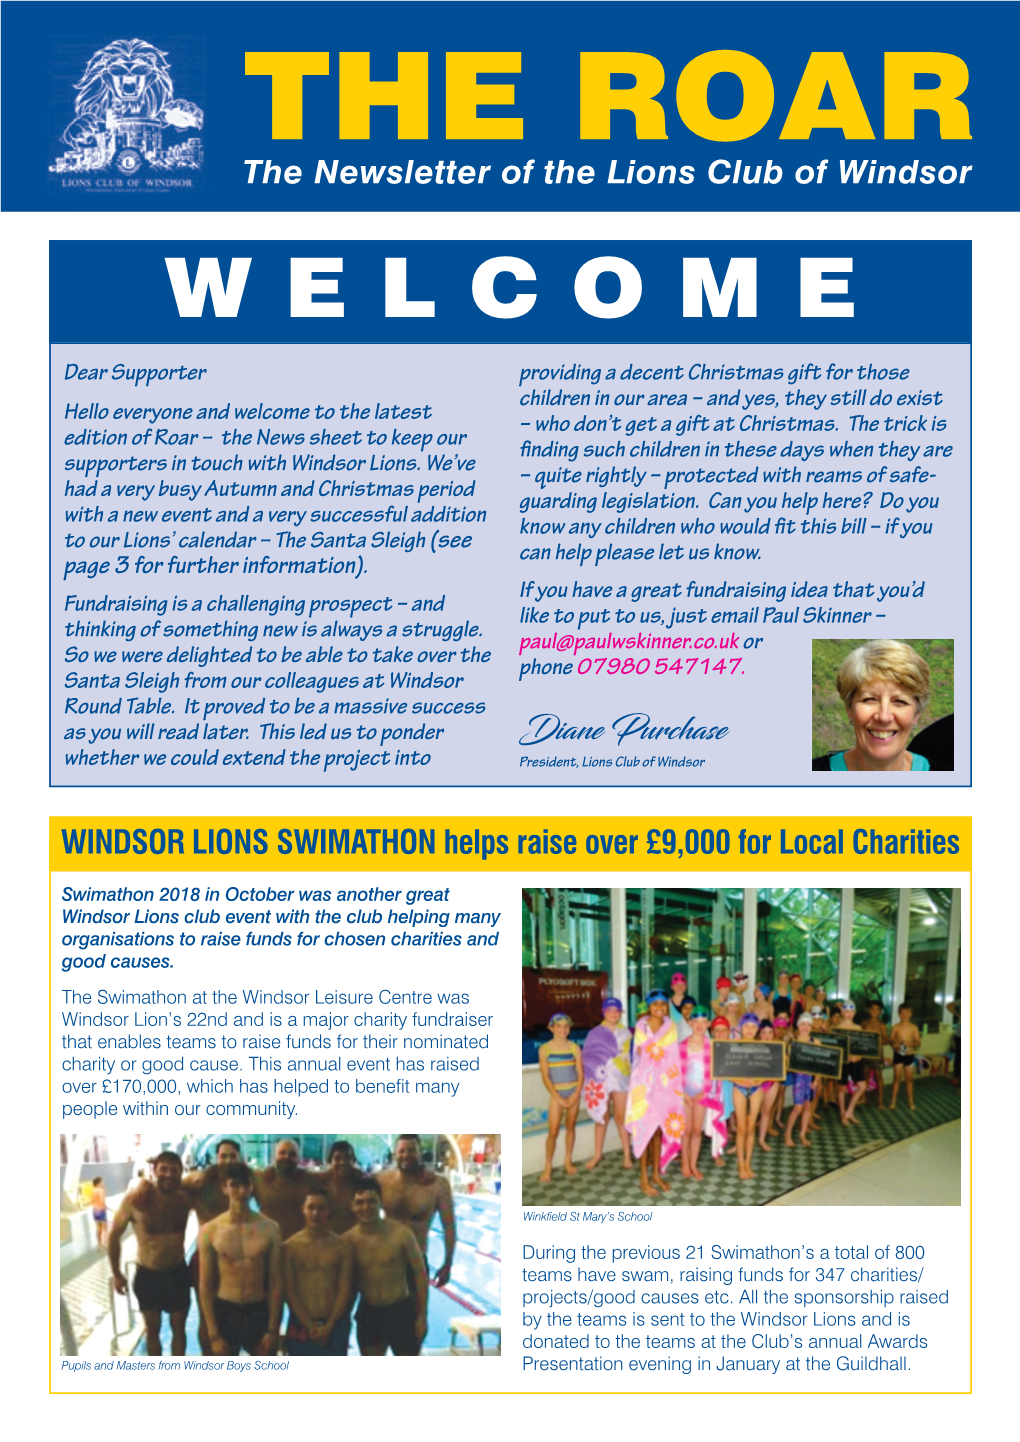 THE ROAR the Newsletter of the Lions Club of Windsor WELCOME